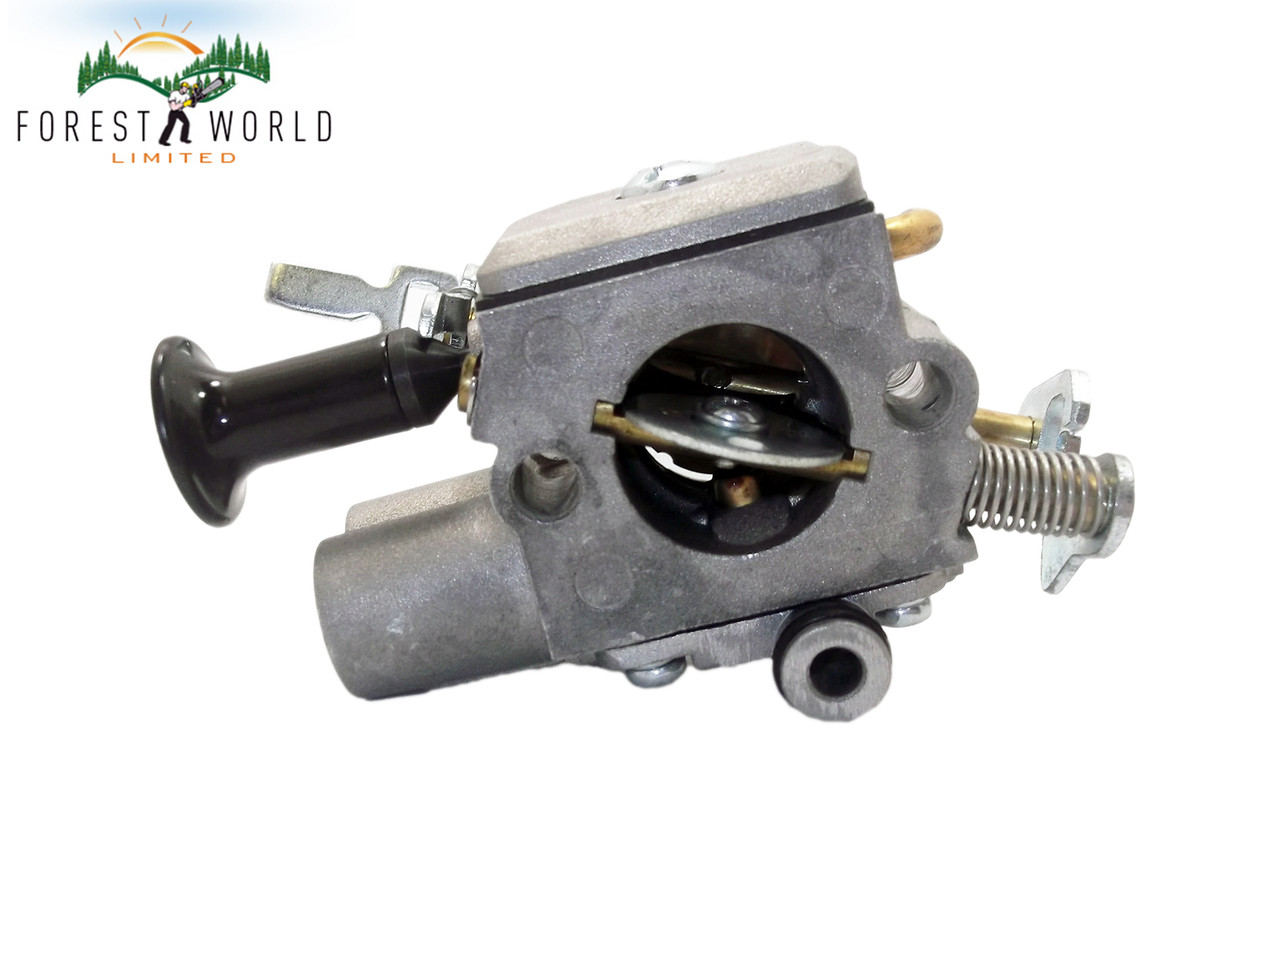 Carburettor Carb ZAMA type For STIHL MS261 MS271 MS291 chainsaws